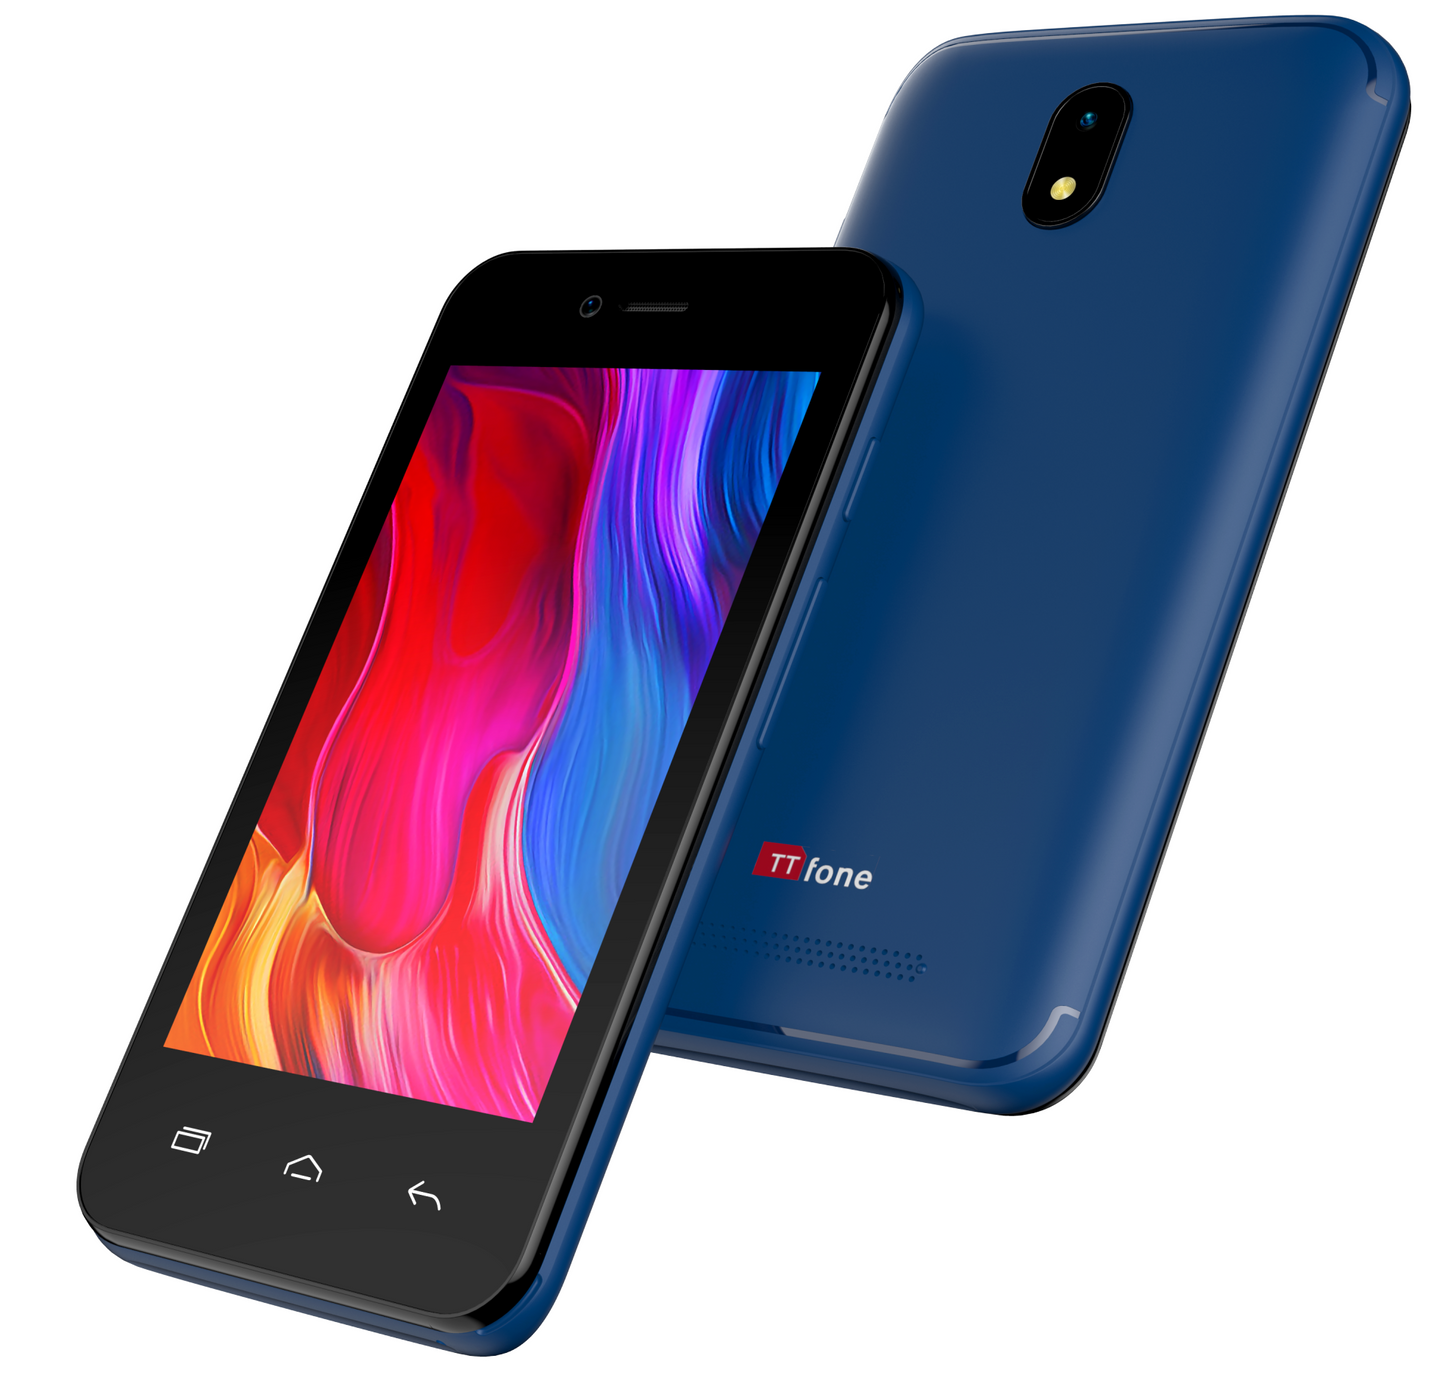 TTfone TT20 Blue Dual SIM with USB Charger, Vodafone Pay as you Go